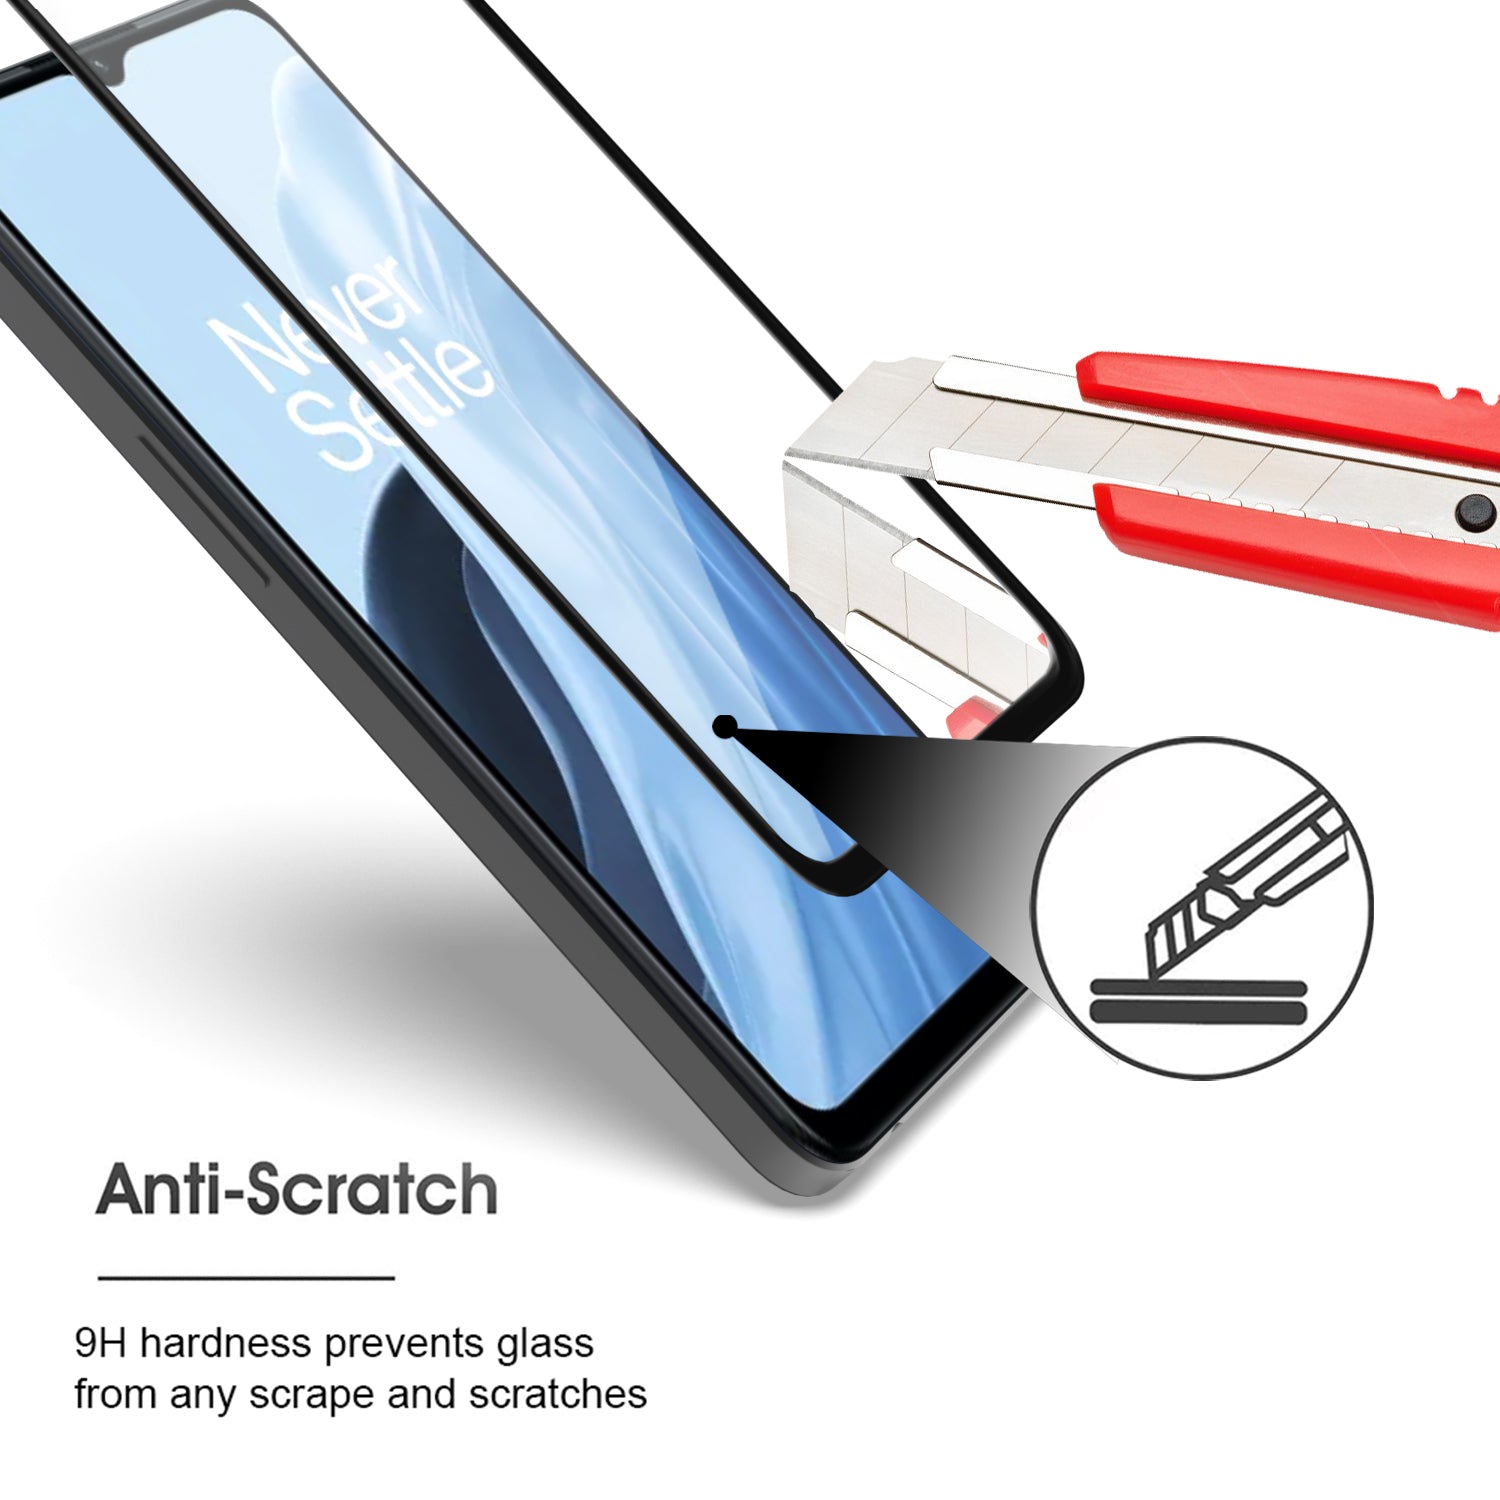 1+ OnePlus Nord N300 5G Screen Protector Tempered Glass (1-3 Piece)